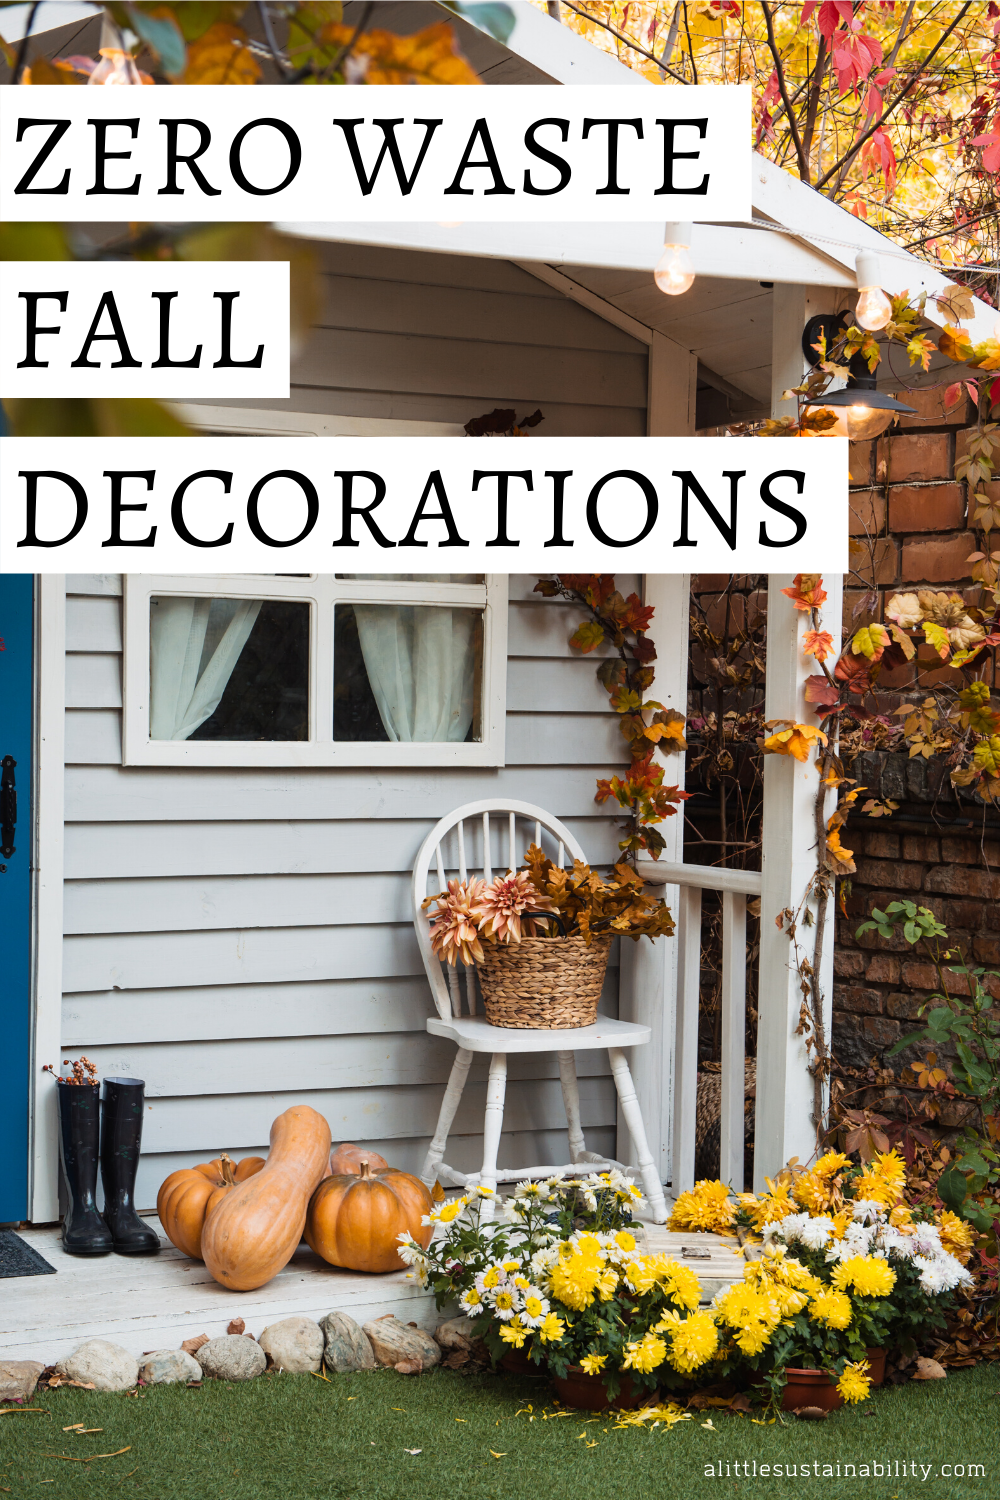 Going zero waste this fall with your home decor is a great way to bring natural elements of the season indoors to really set the fall scene. Learn more at www.alittlesustainablitity.com